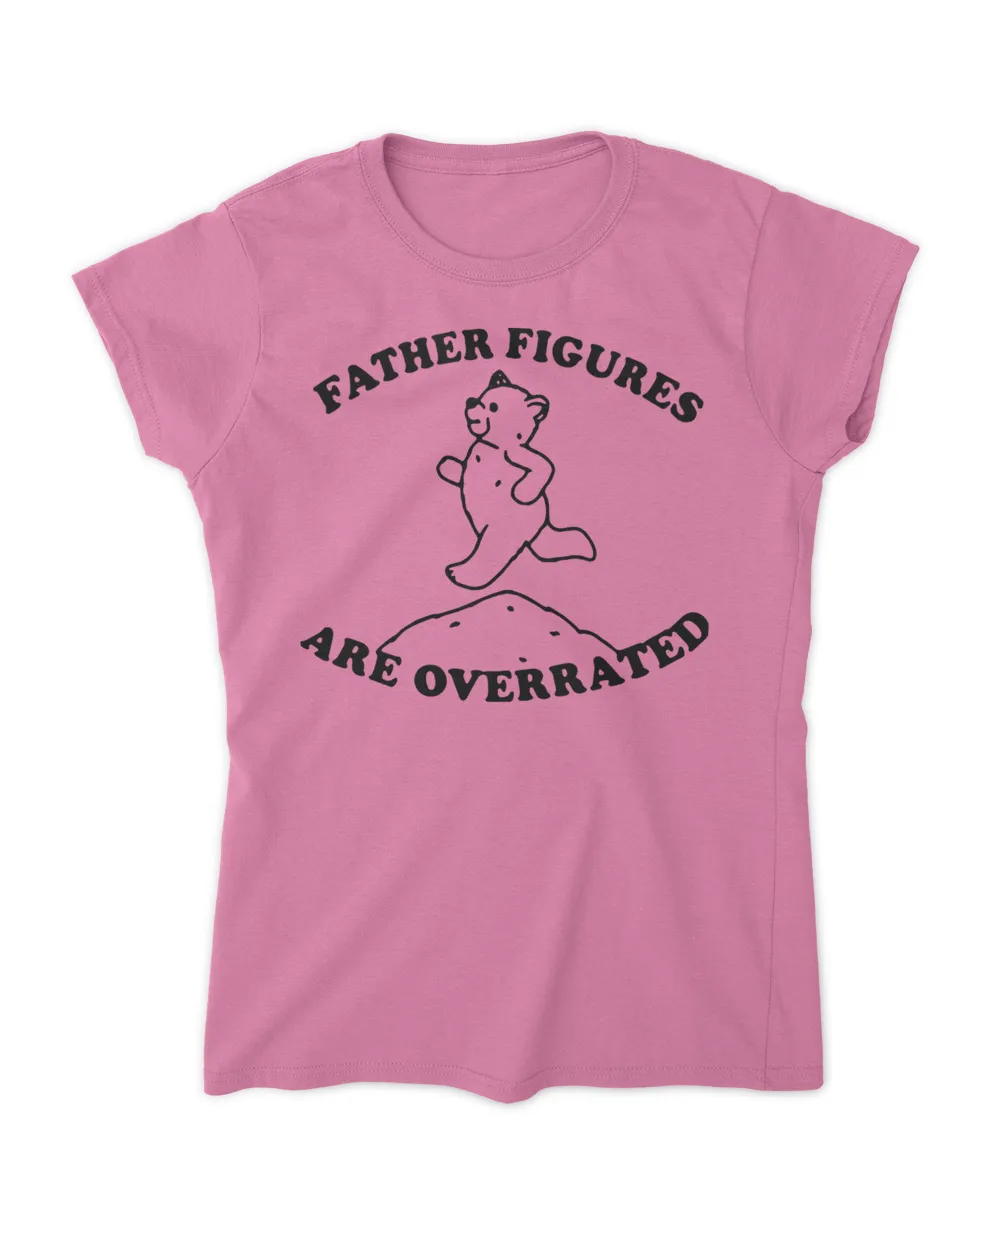 Father Figures Are Overrated Shirt Women's Soft Style Fitted T-Shirt azalea 